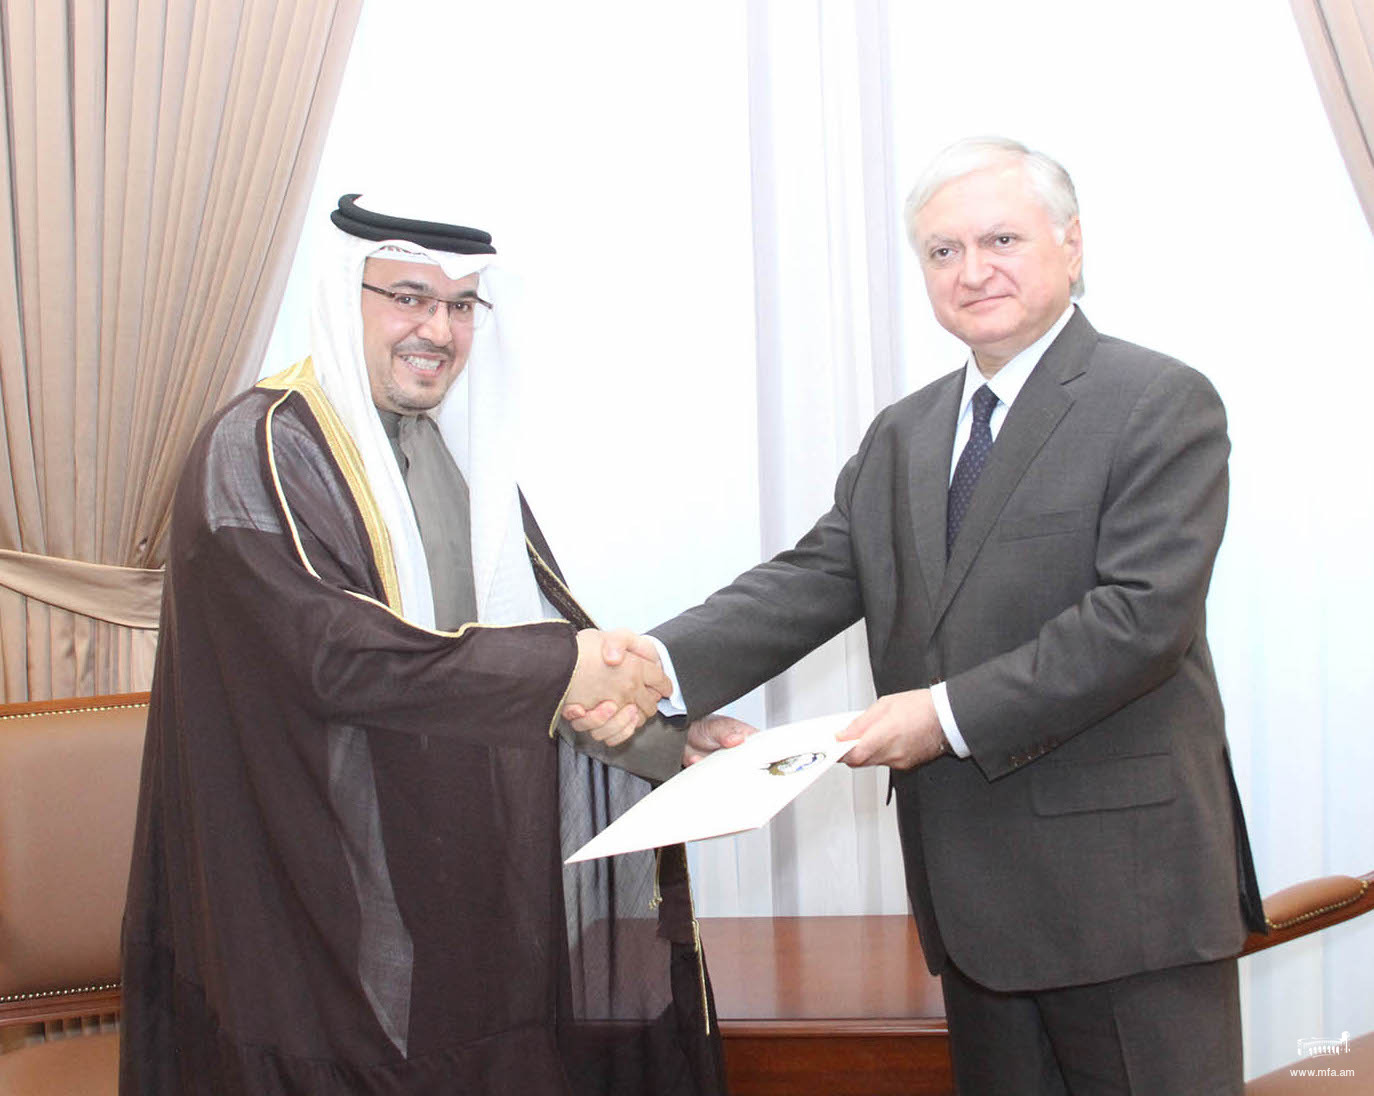 The newly appointed Ambassador of Kuwait presented the copies of his credentials to the Foreign Minister